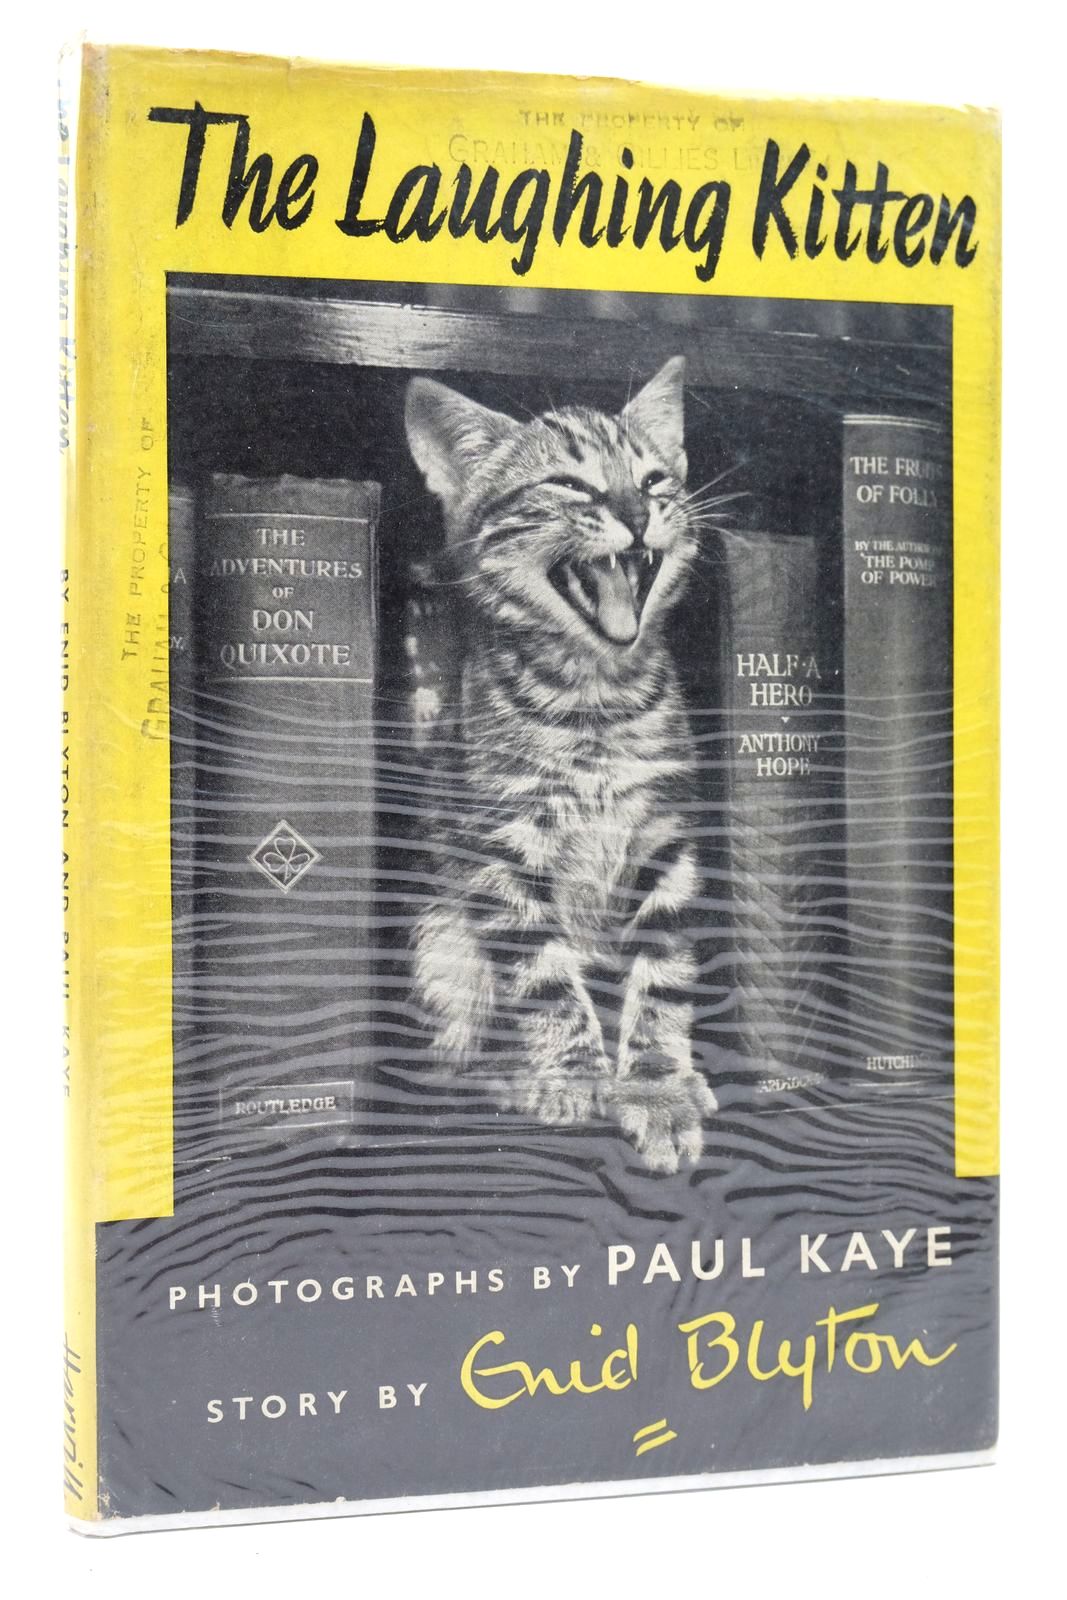 Photo of THE LAUGHING KITTEN written by Blyton, Enid illustrated by Kaye, Paul published by The Harvill Press (STOCK CODE: 2139709)  for sale by Stella & Rose's Books